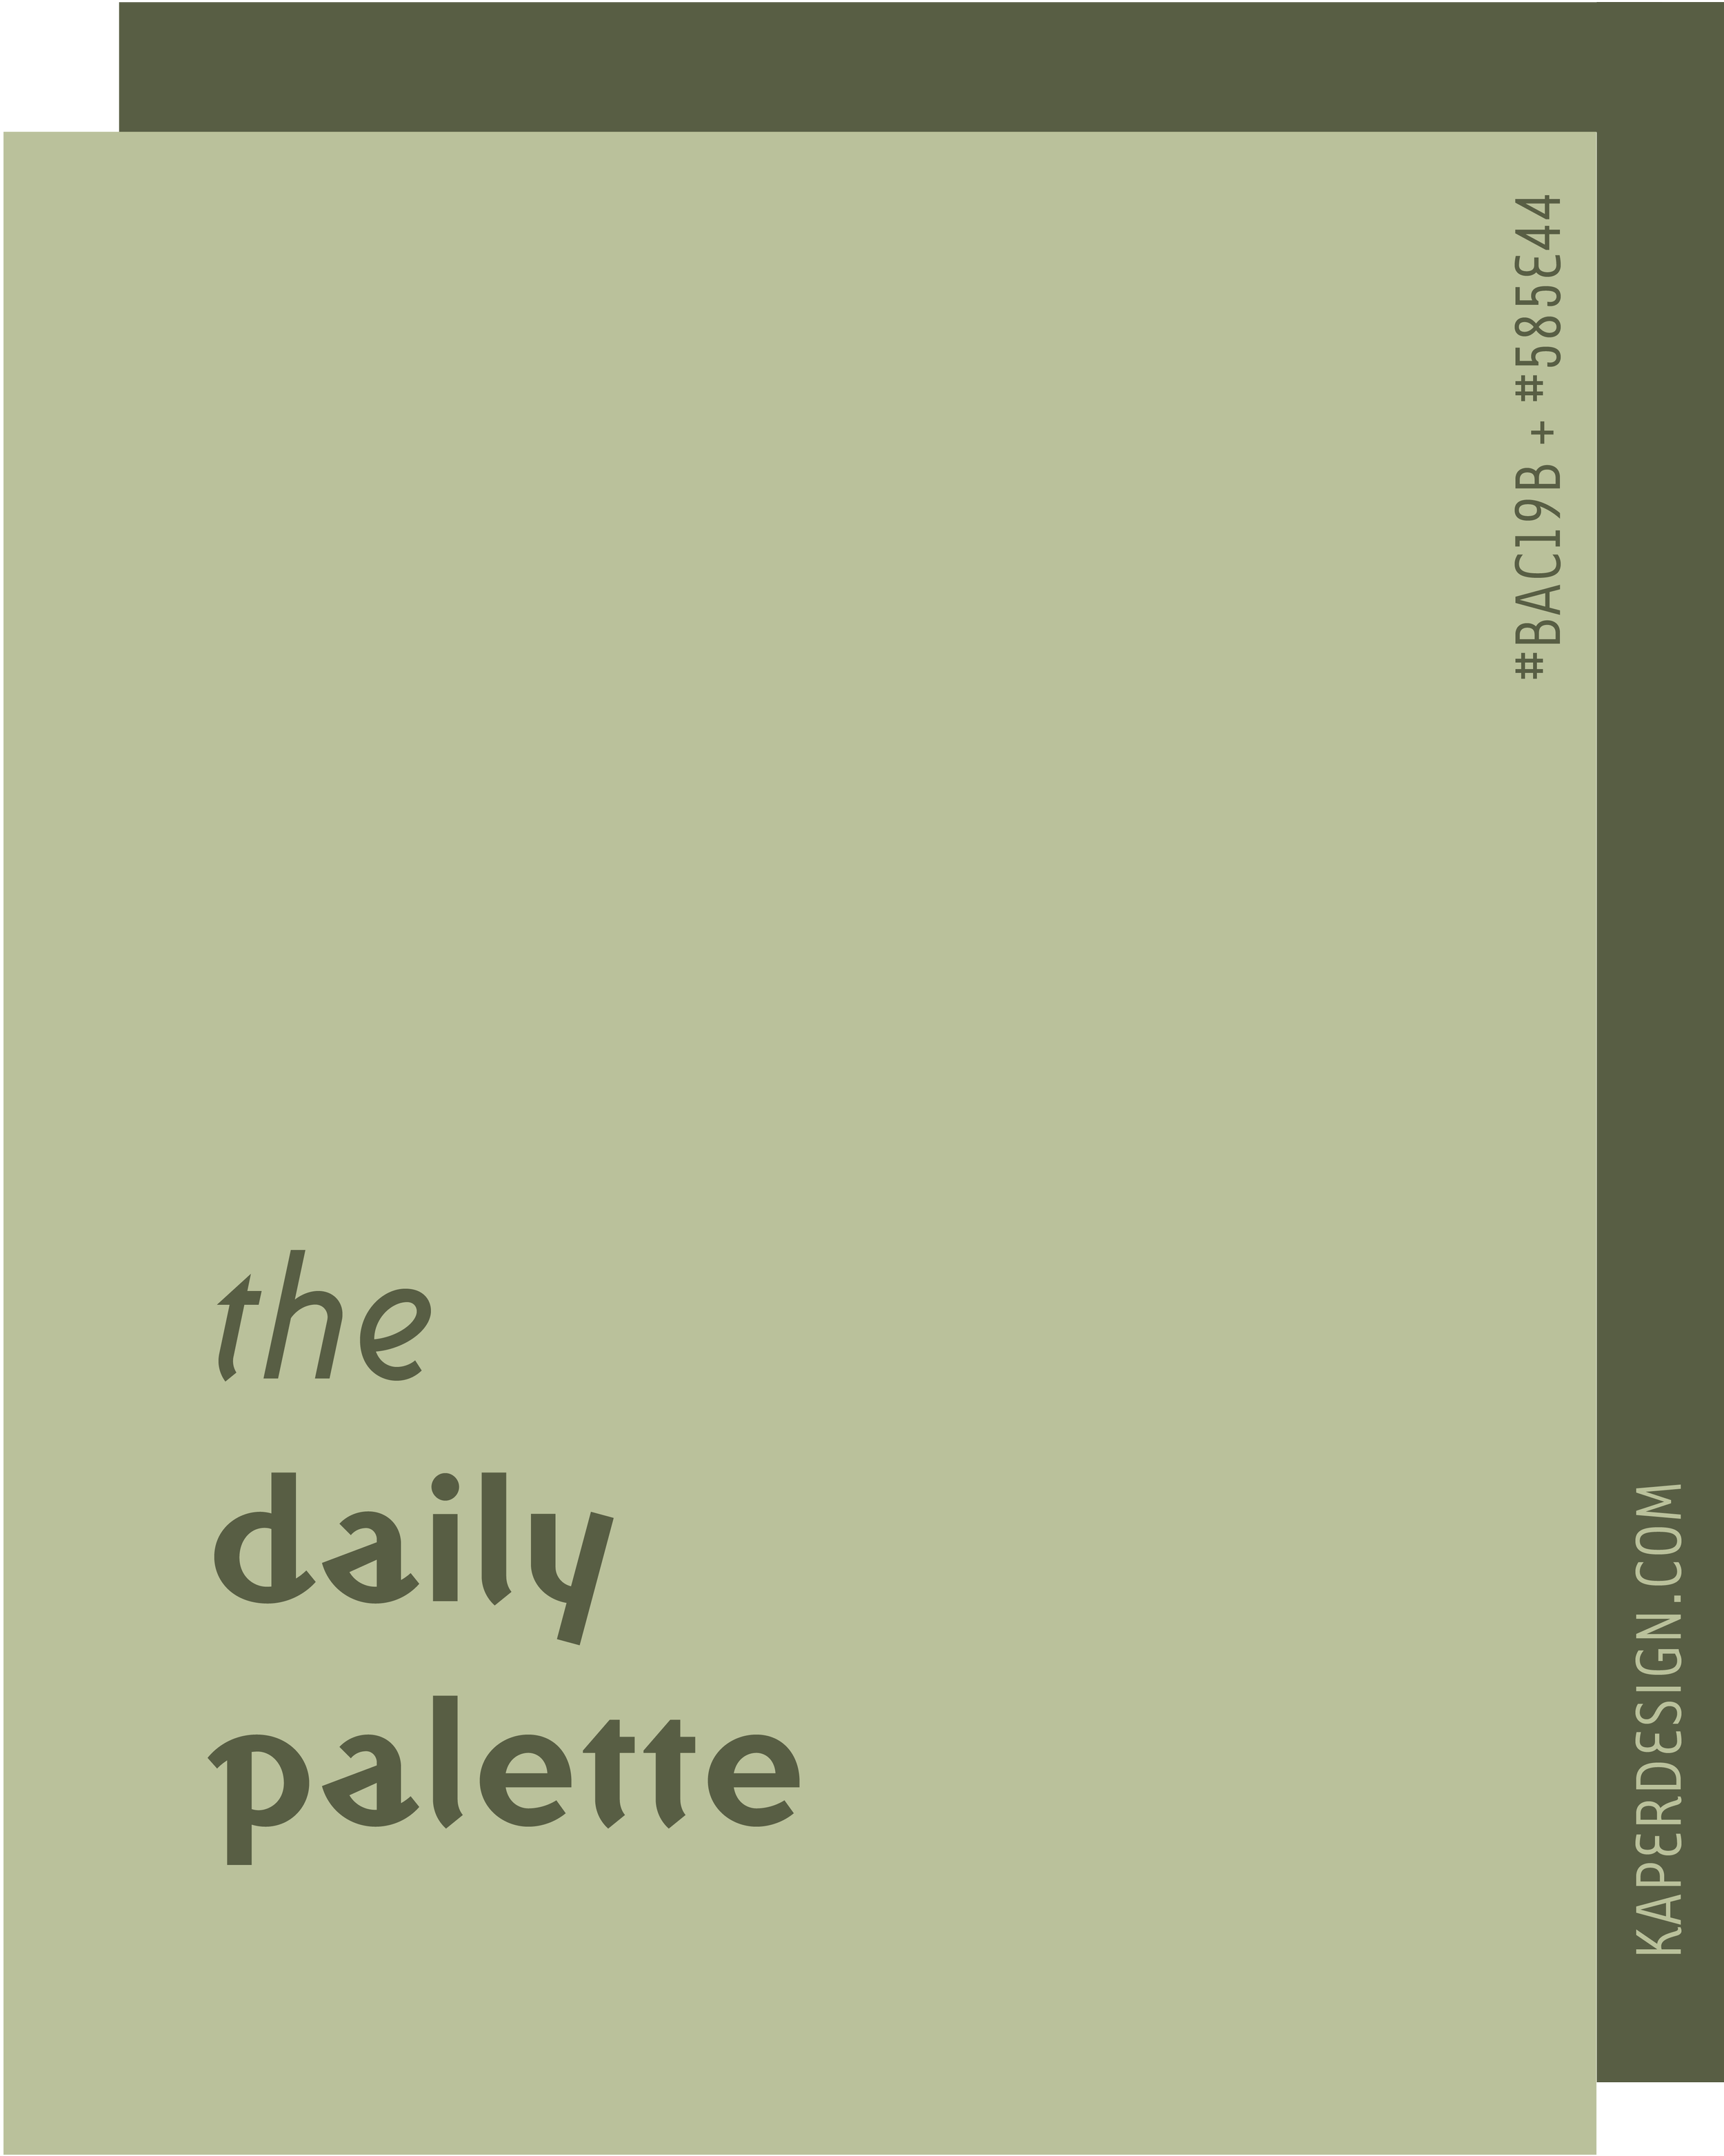 Kaper Design_the Daily Palette Project-20.png